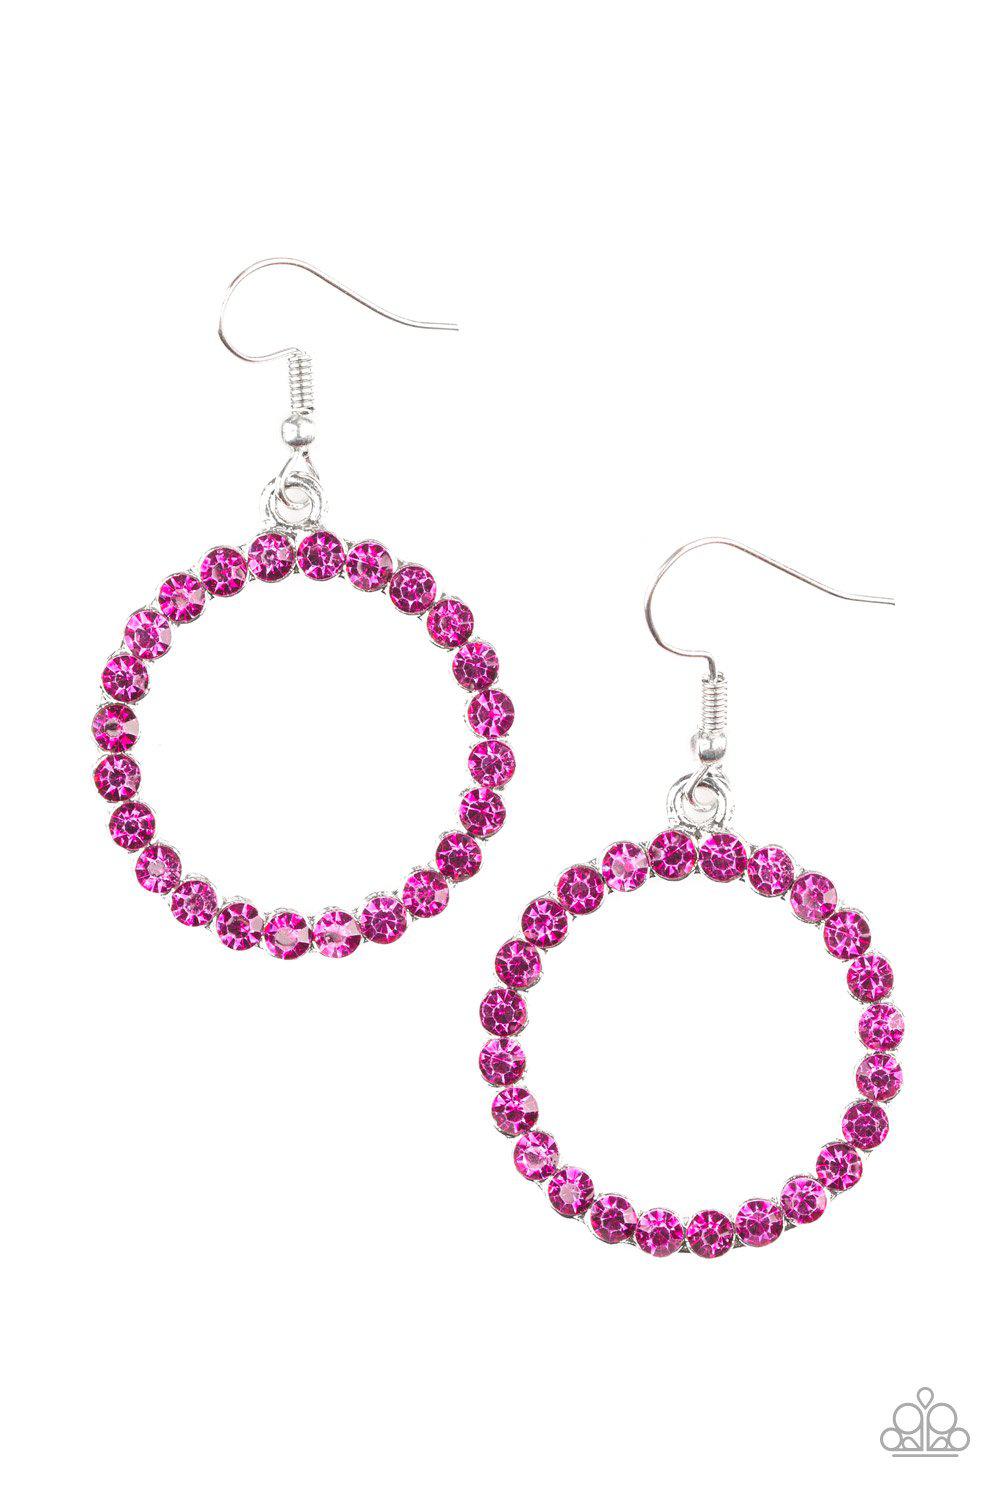 Bubblicious Pink Rhinestone Earrings - Paparazzi Accessories-CarasShop.com - $5 Jewelry by Cara Jewels